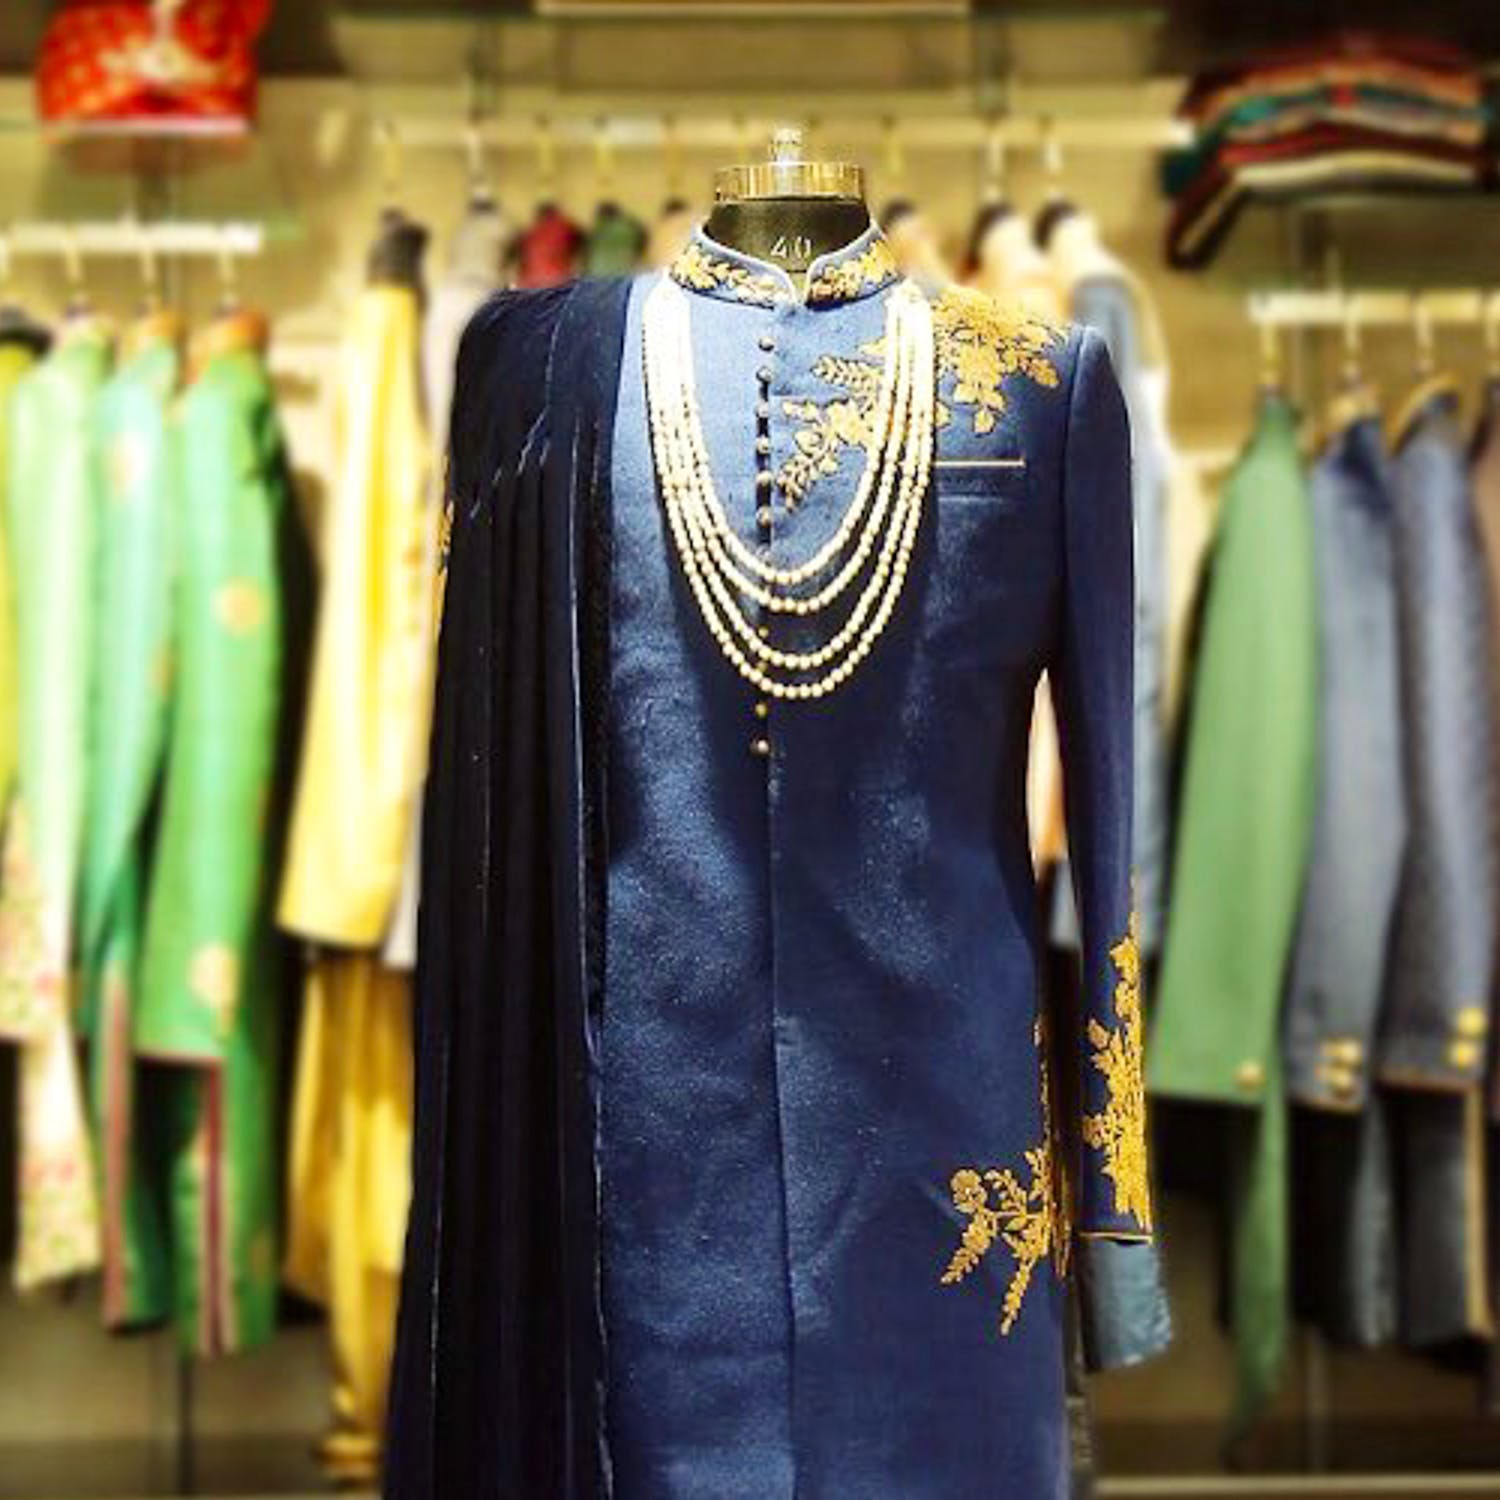 Where To Go For Men S Wedding Shopping Lbb Hyderabad Groom studio special suit & sherwani,jodhpuri. where to go for men s wedding shopping